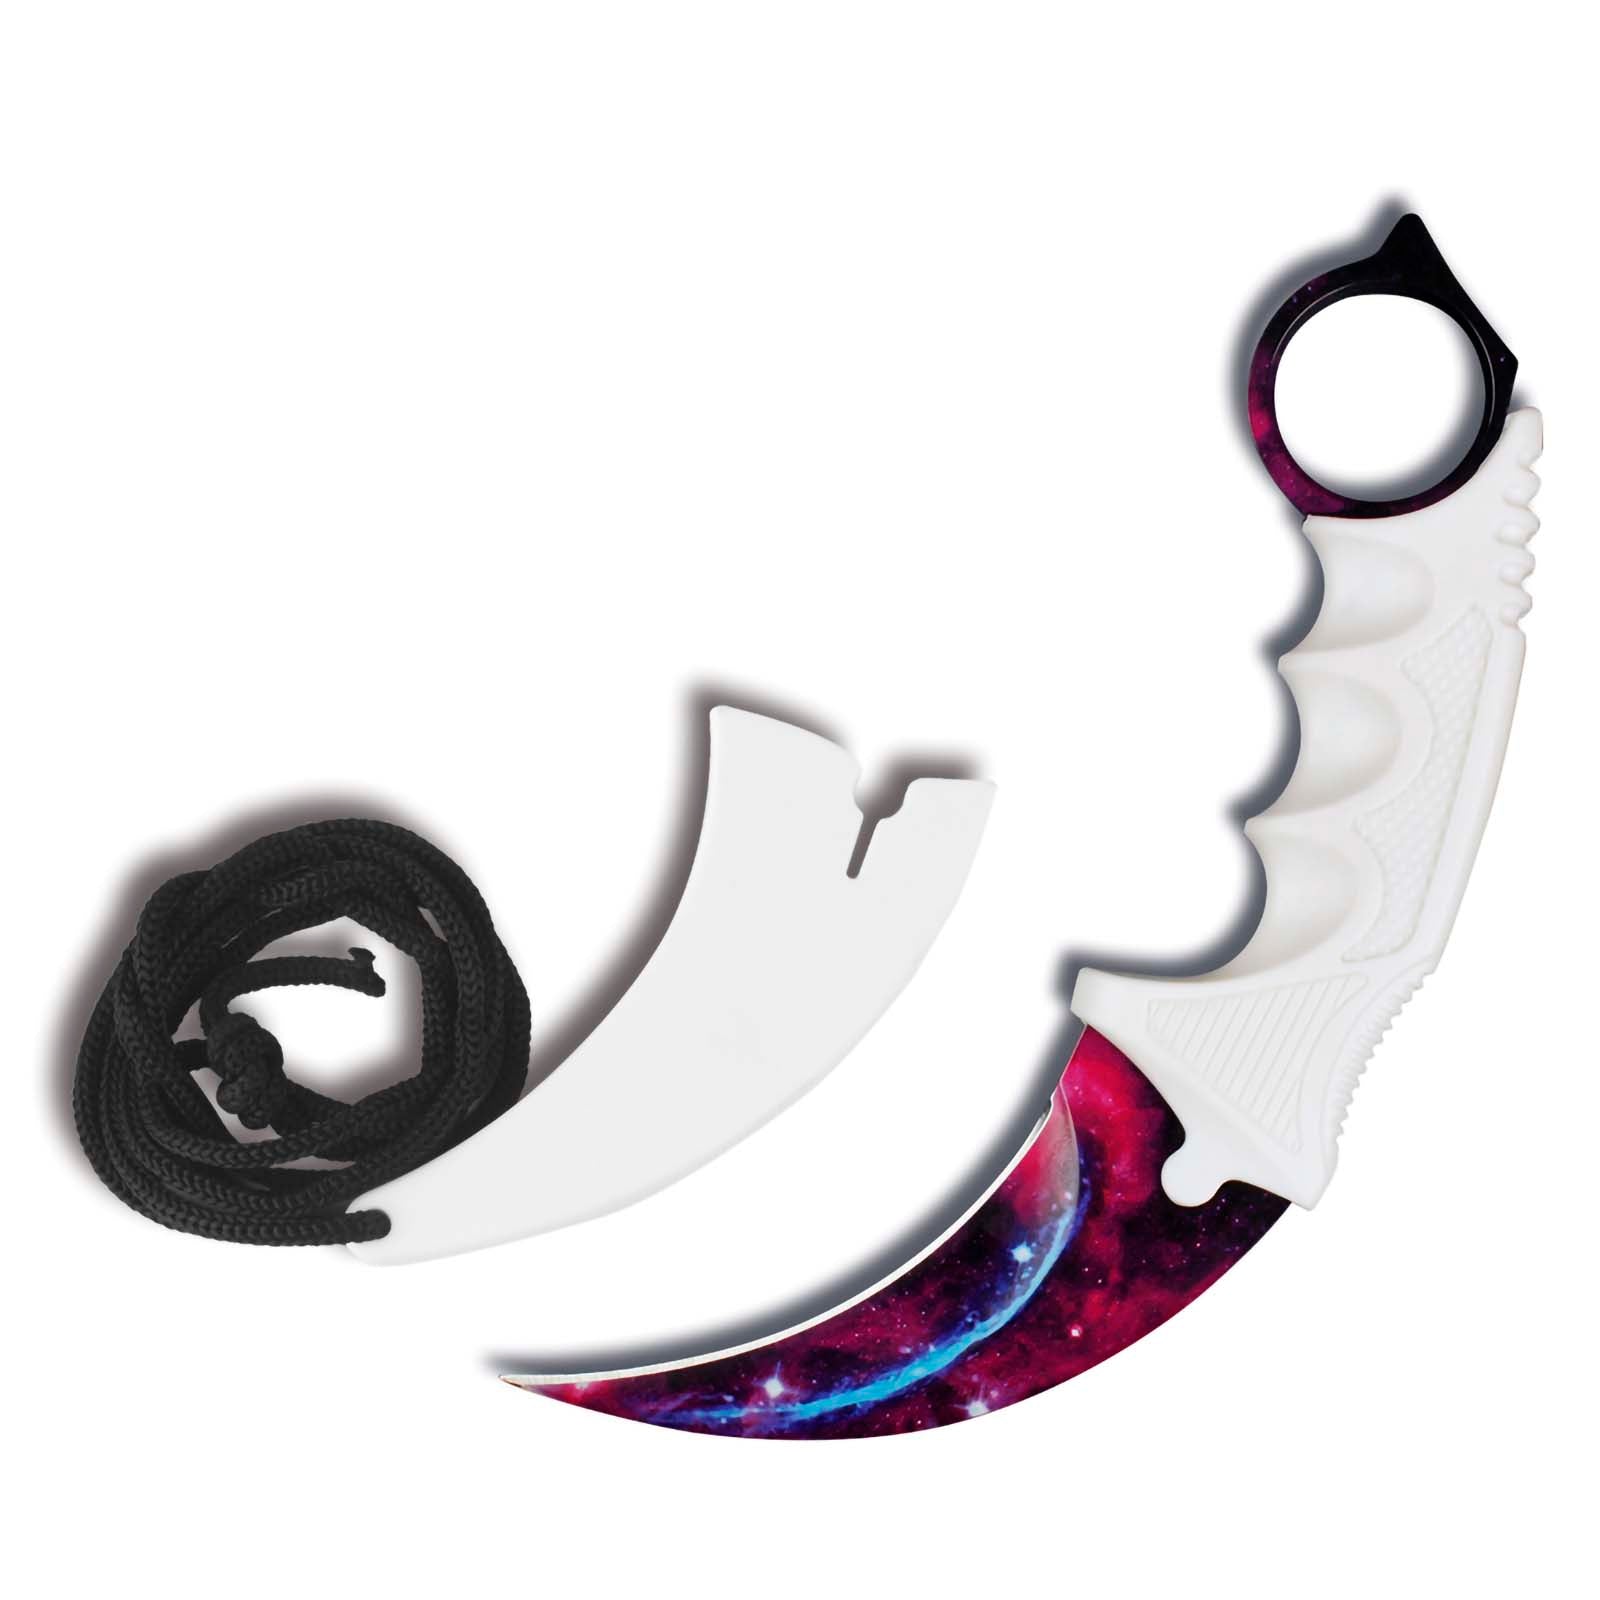 Andux Karambit Knife Tool with Cord CS/ZD-01 White (ONLY Available in the United States)